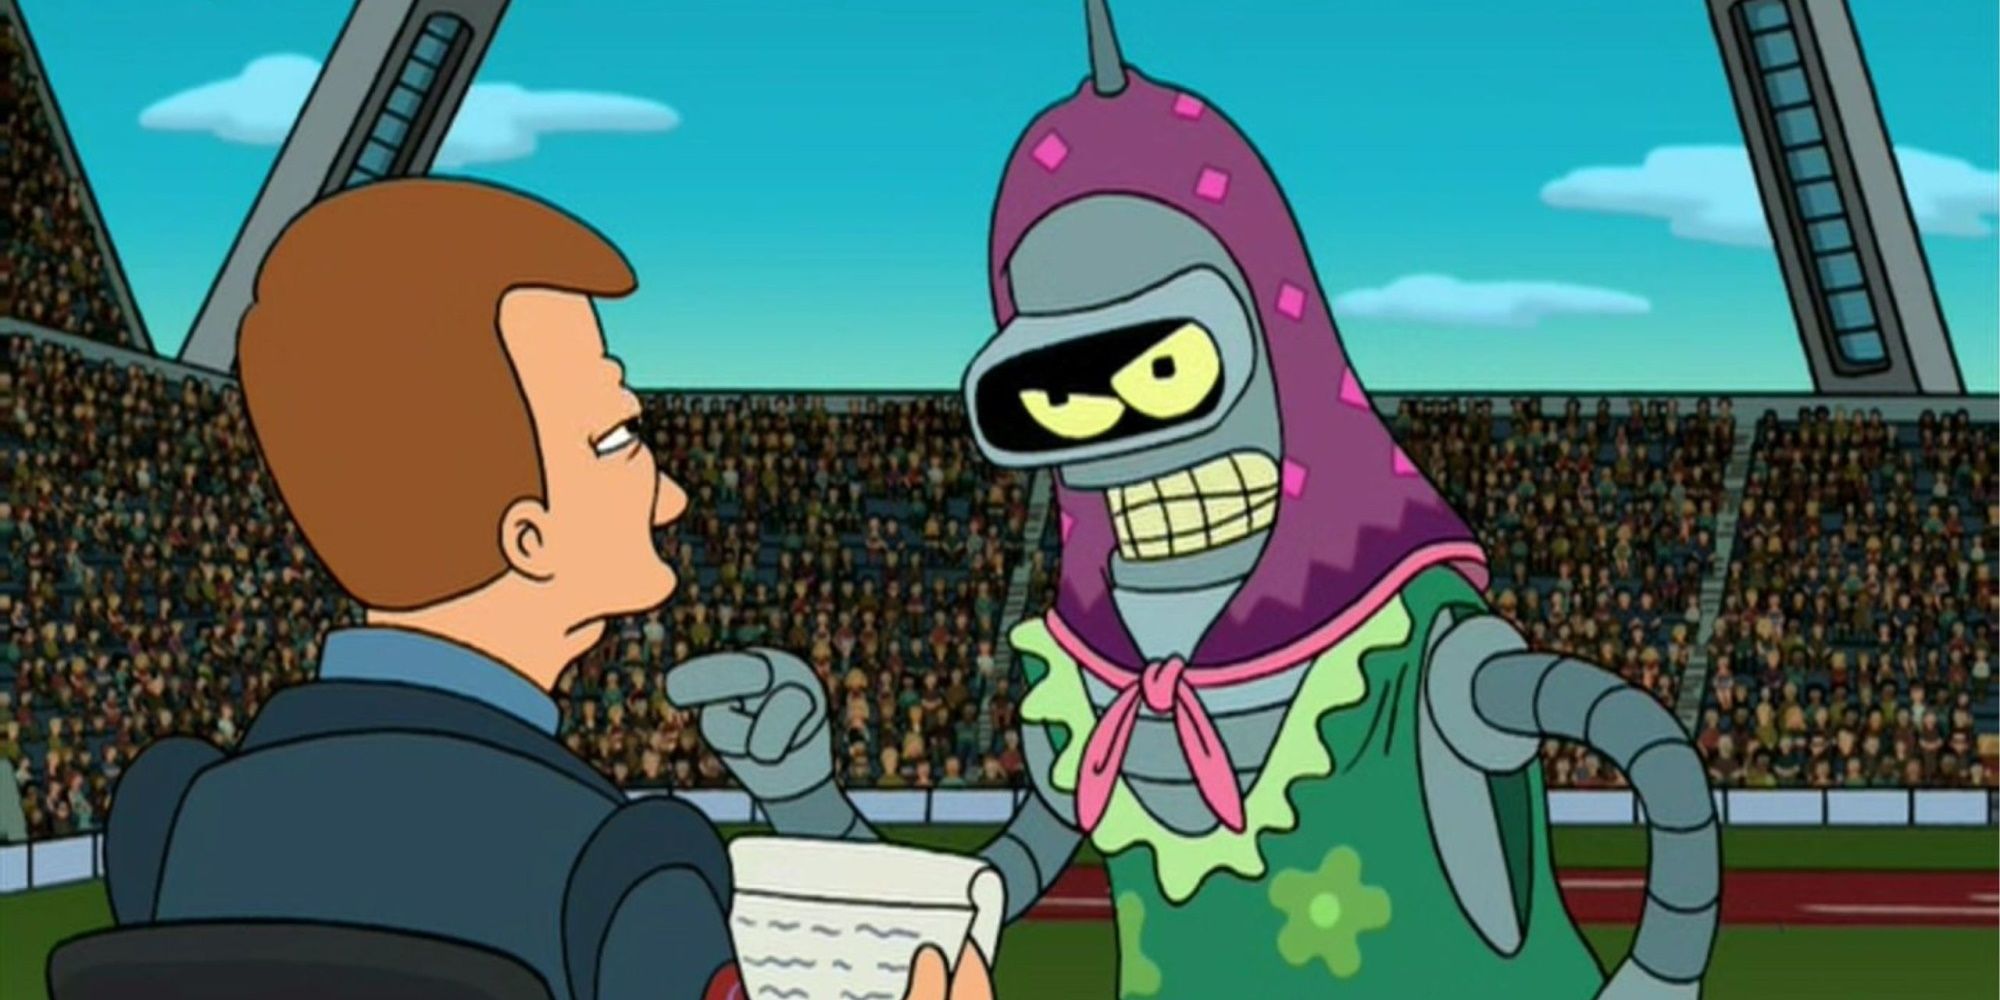 Bender Futurama in the episode Bend Her dressed as Coillette